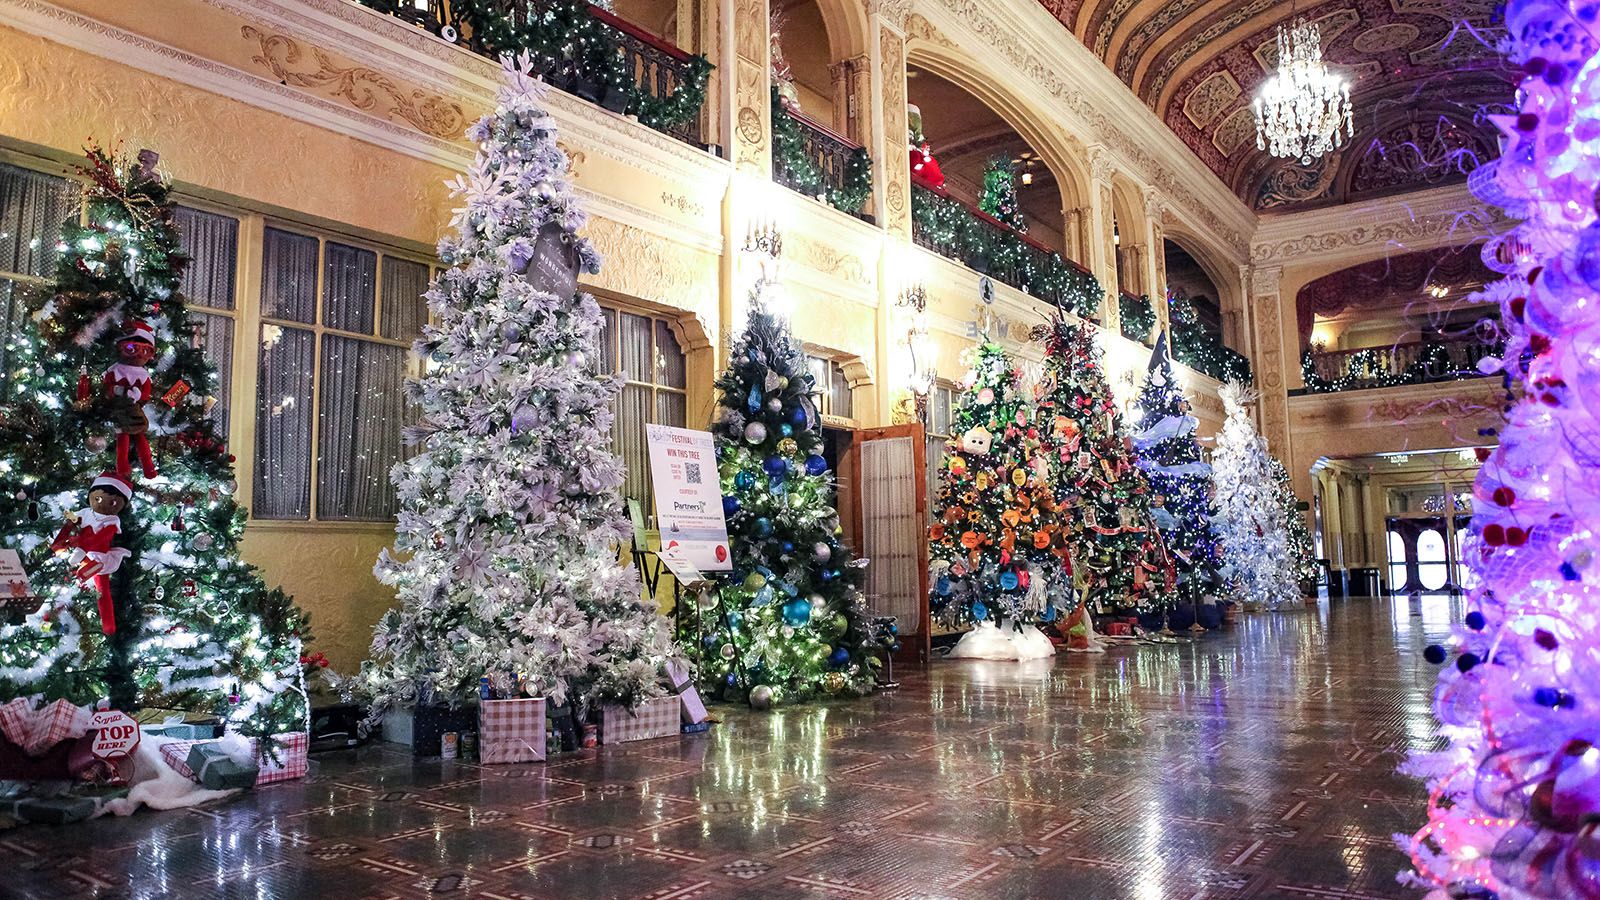 The Festival of Trees will be at Embassy Theatre from Nov. 23-30.